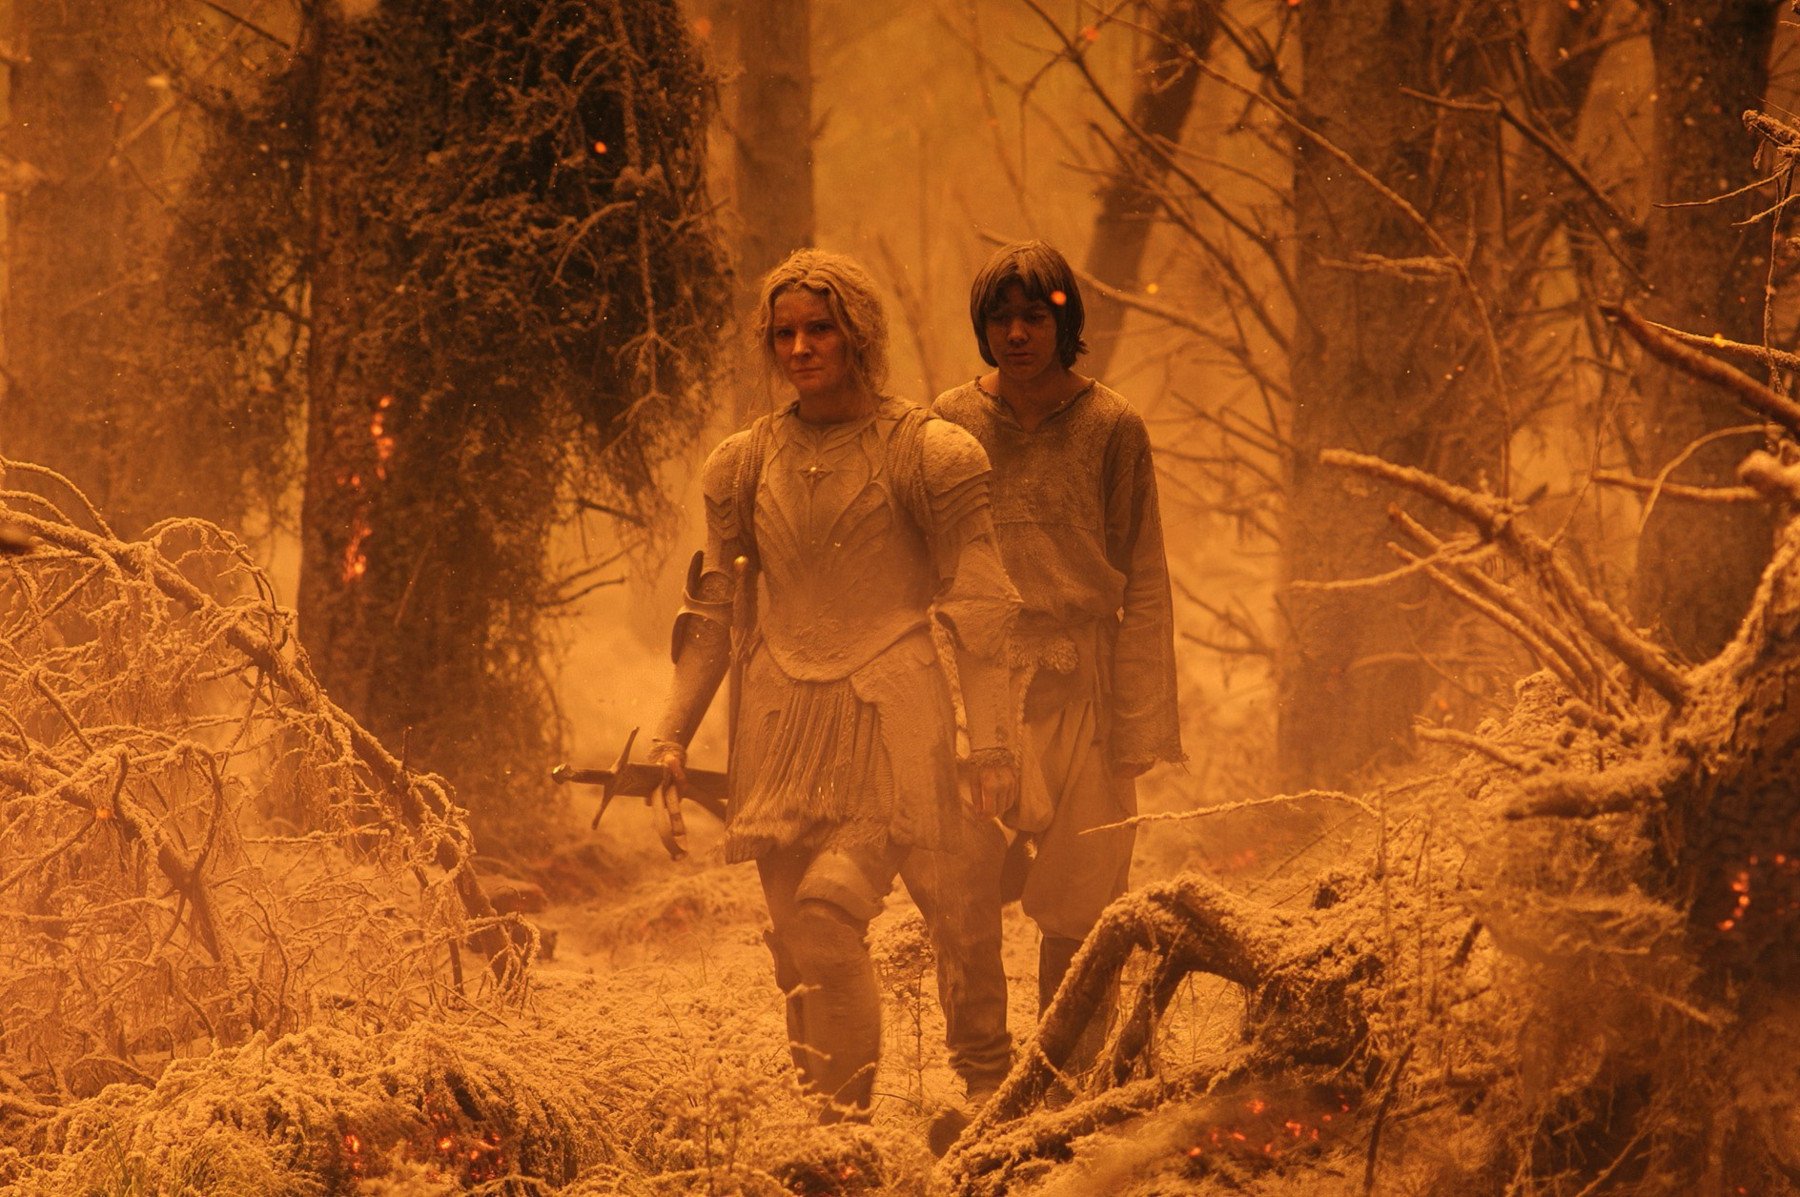 Morfydd Clark and Tyroe Muhafidin as Galadriel and Theo in 'The Rings of Power' Episode 7 for our article about its Easter Eggs. They're walking through the burned Southlands, and everything is orange and ashy.